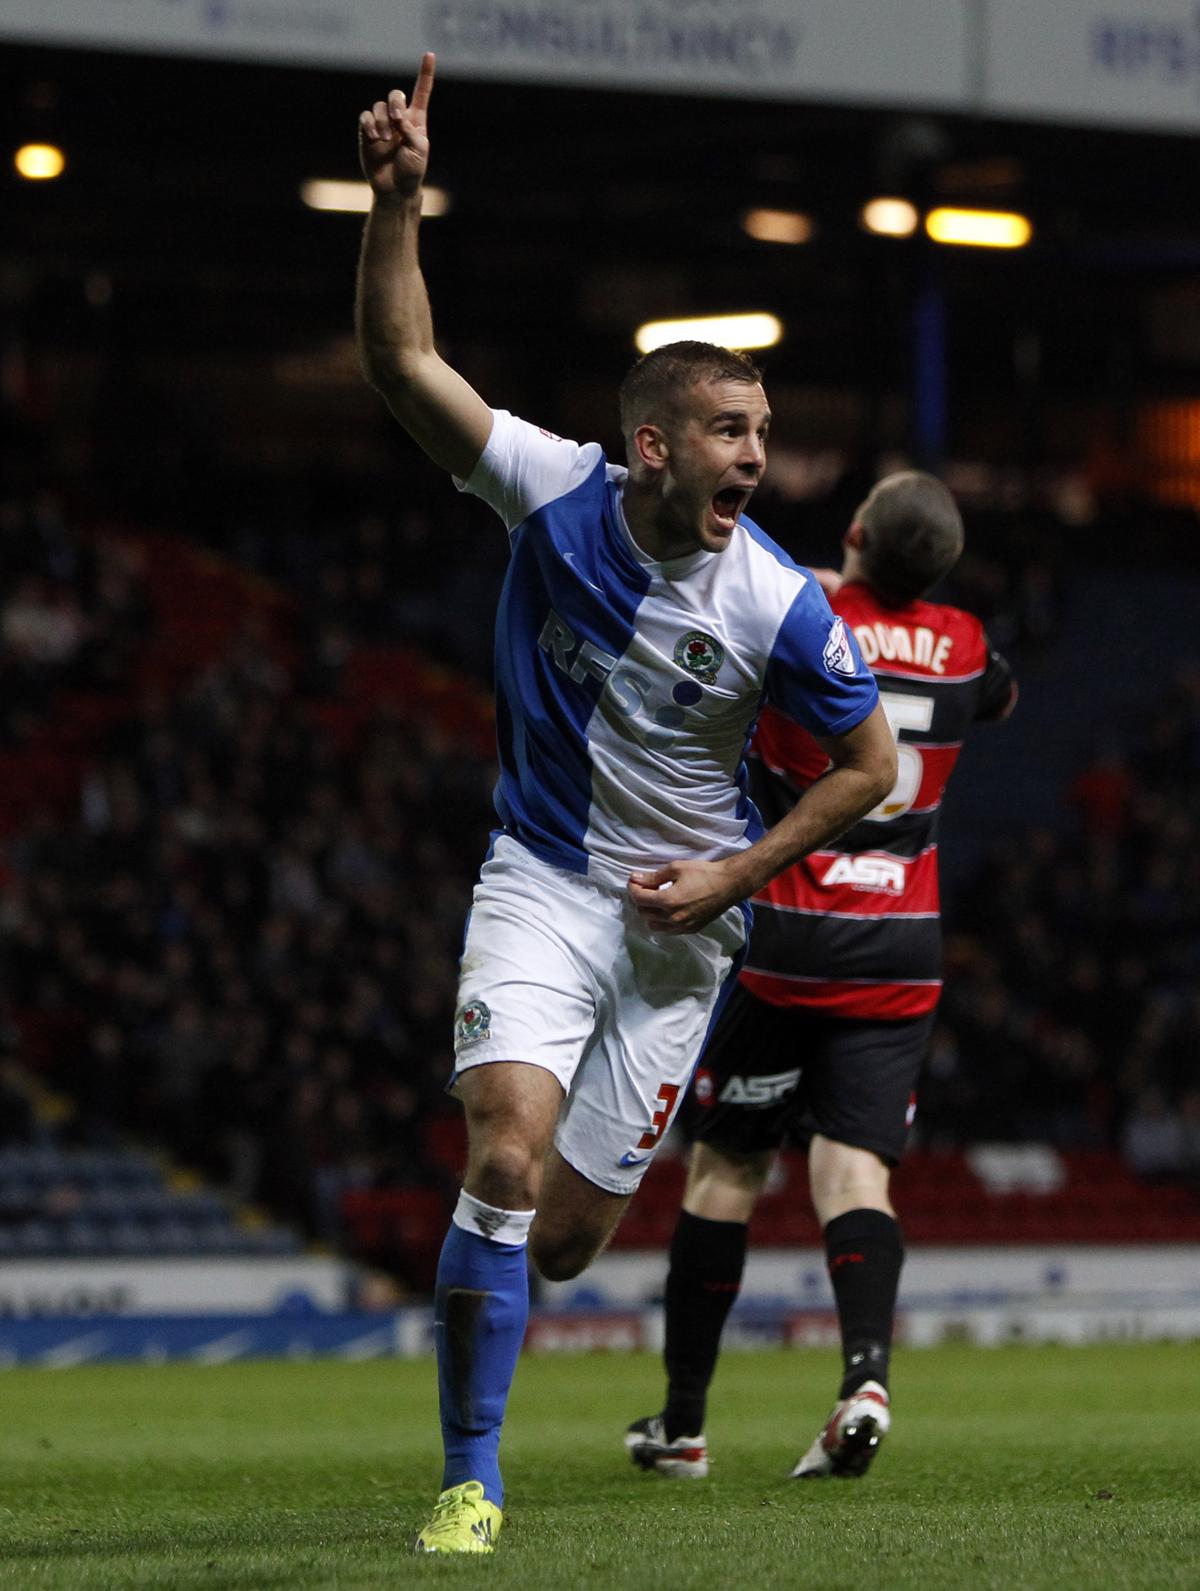 Blackburn Rovers take on promotion chasing QPR at Ewood Park.